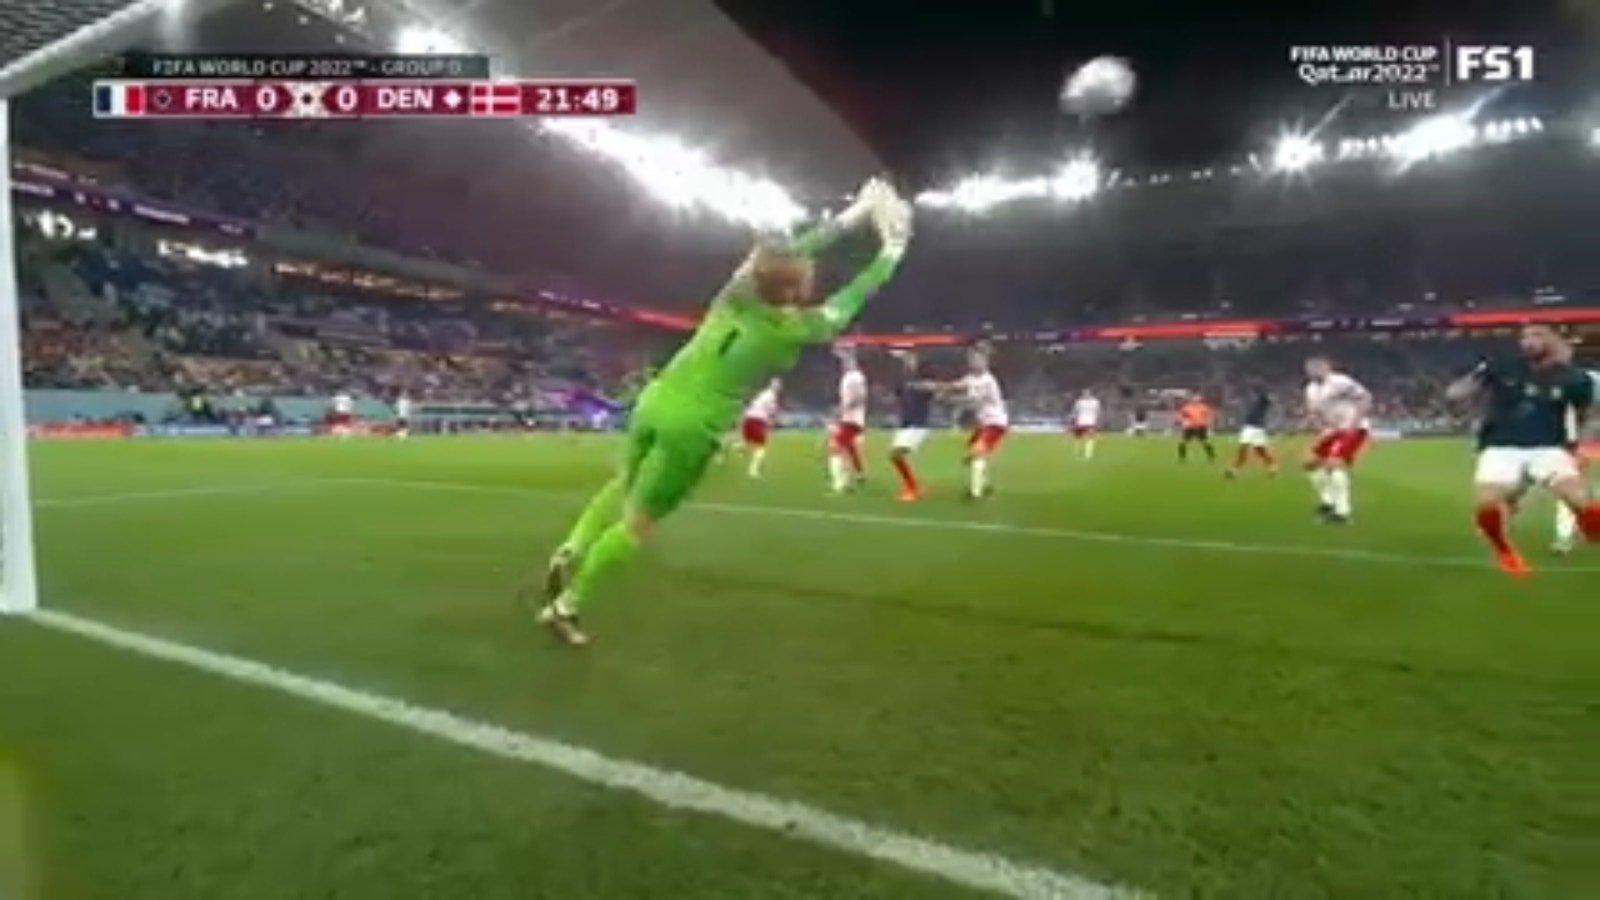 Kasper Schmeichel makes a great save to keep Denmark and France scoreless